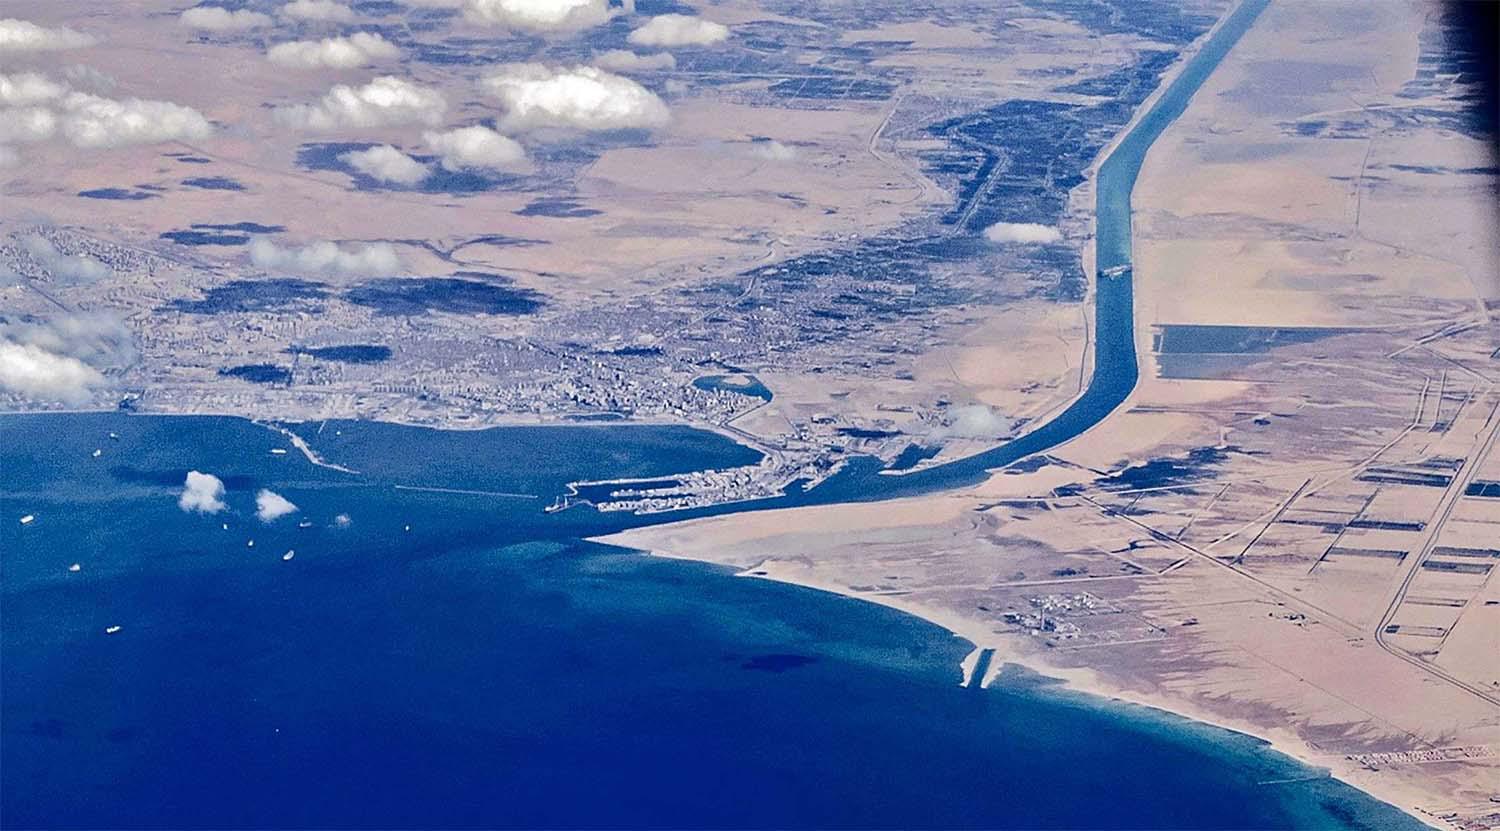 About 10% of world trade flows through the Suez Canal